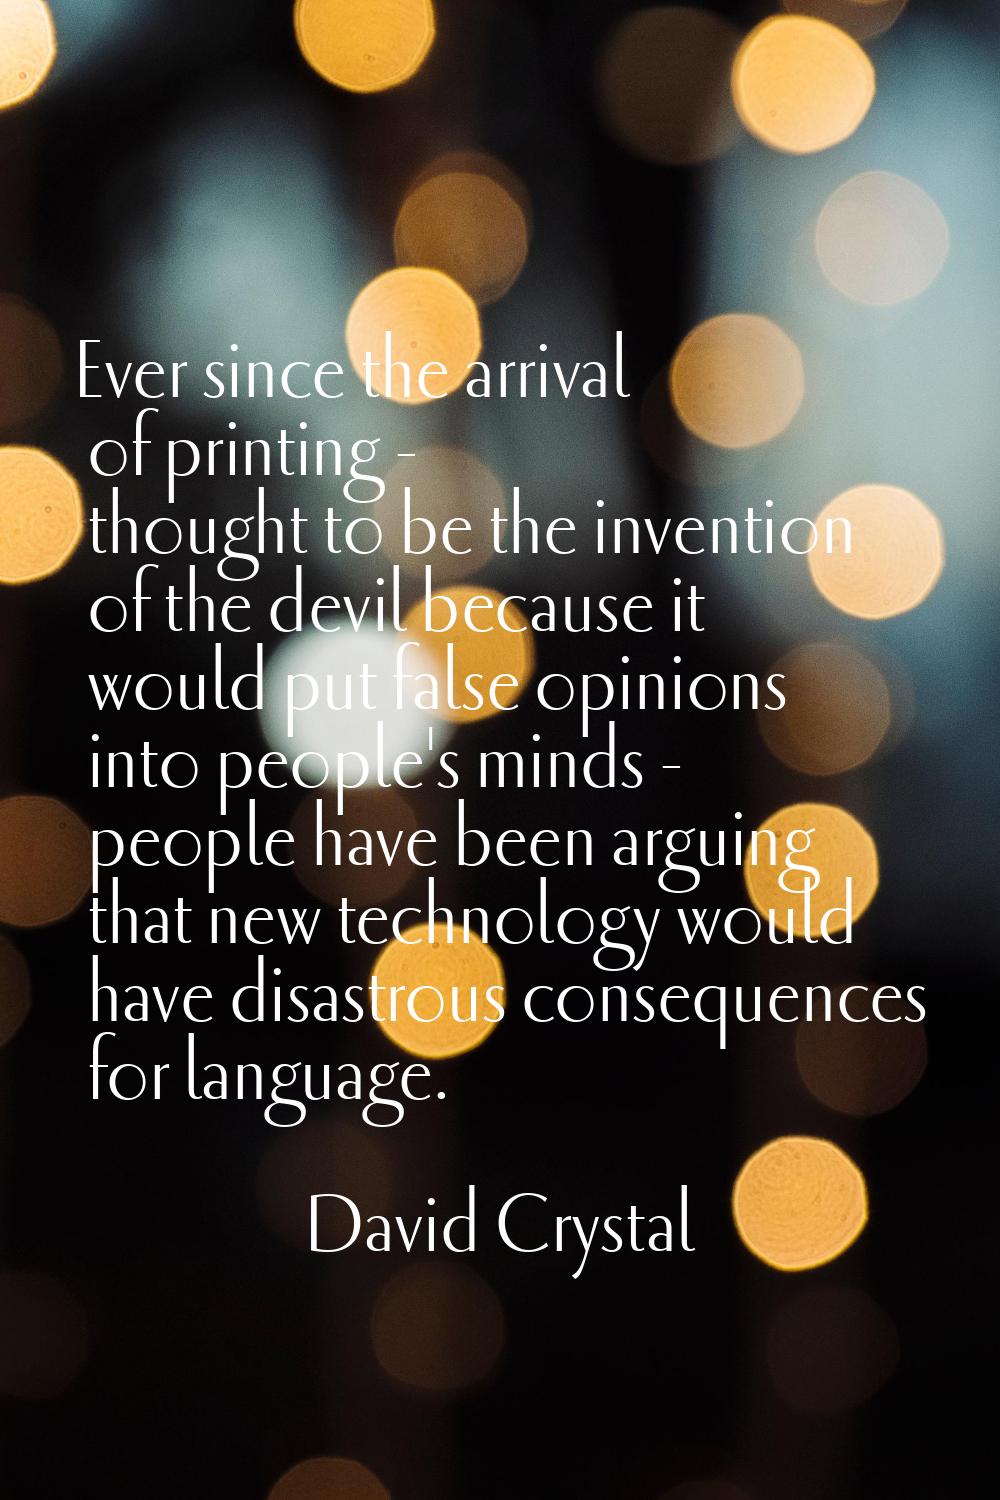 Ever since the arrival of printing - thought to be the invention of the devil because it would put 